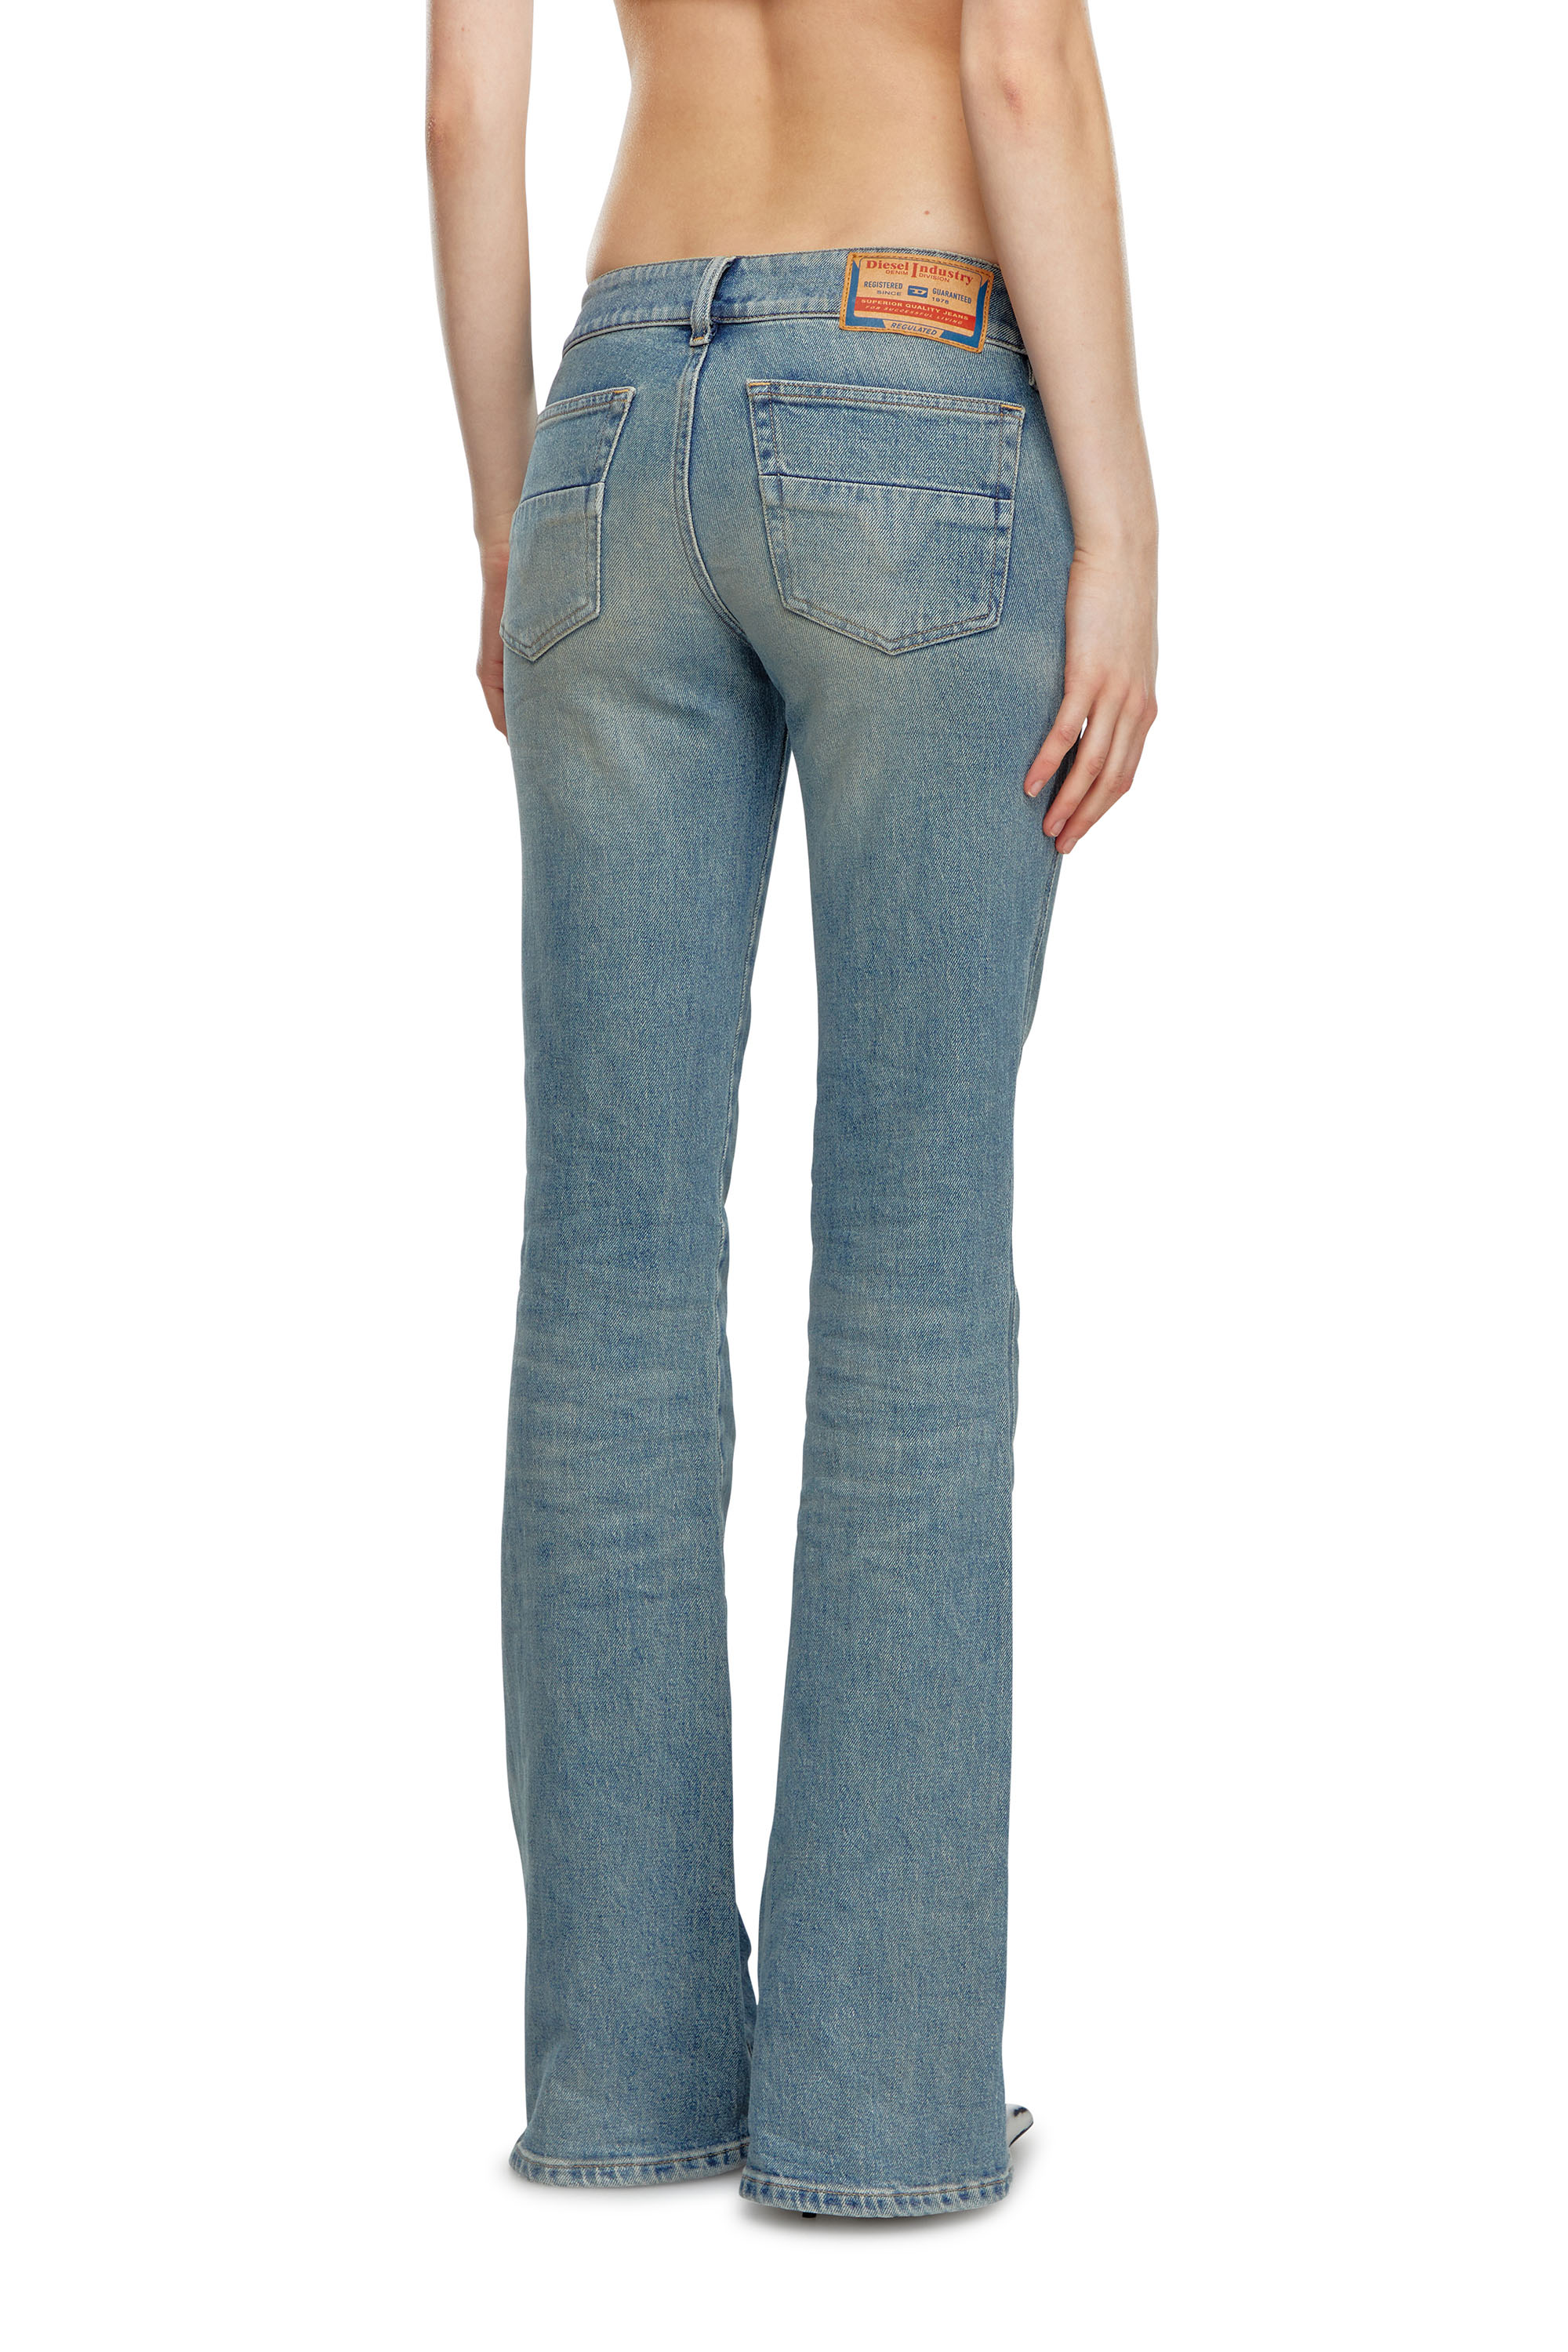 Diesel - Bootcut and Flare Jeans D-Hush 09J55, Mujer Bootcut y Flare Jeans - D-Hush in Azul marino - Image 4